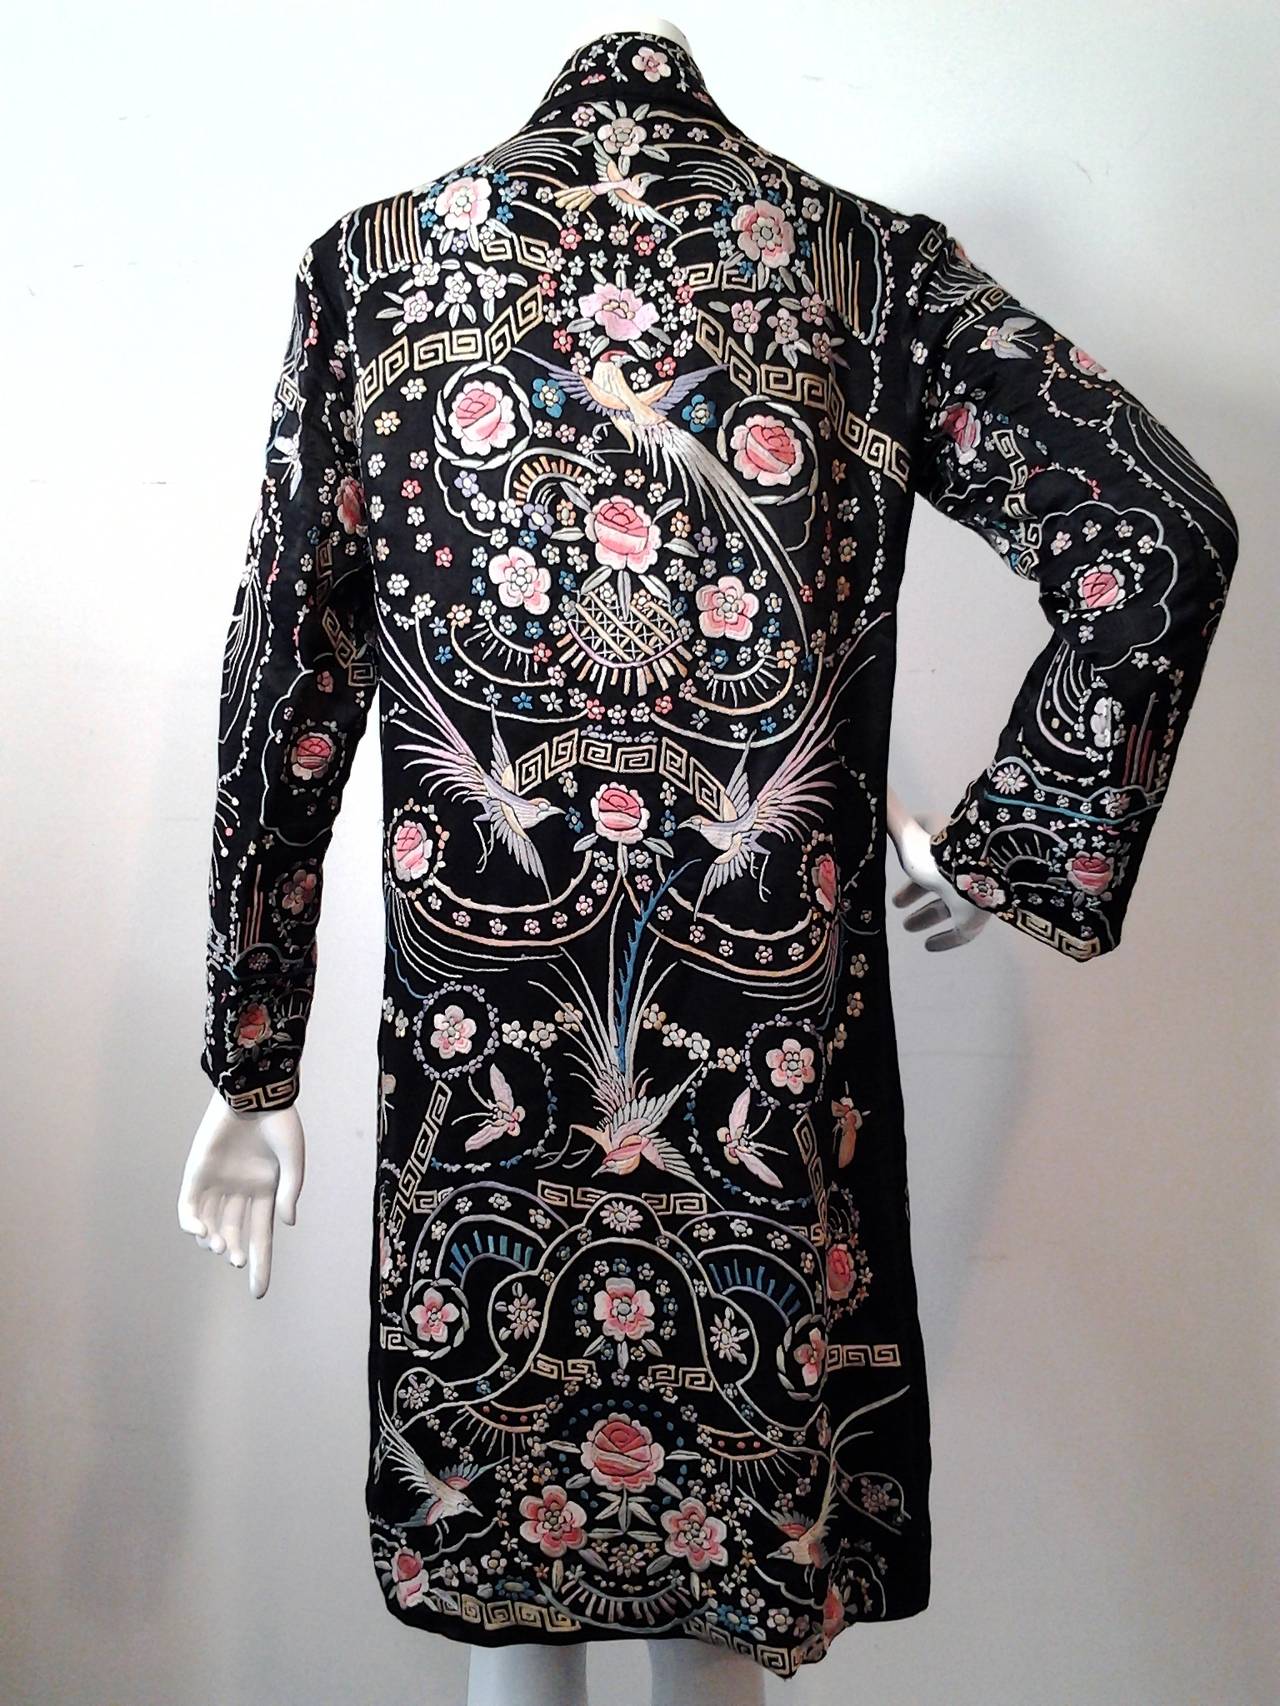 A spectacular silk satin 1920s duster jacket:  Lined in black silk charmeuse. Asymmetrical side button closure. Bird of paradise, butterfly and floral motifs throughout. Gorgeous.